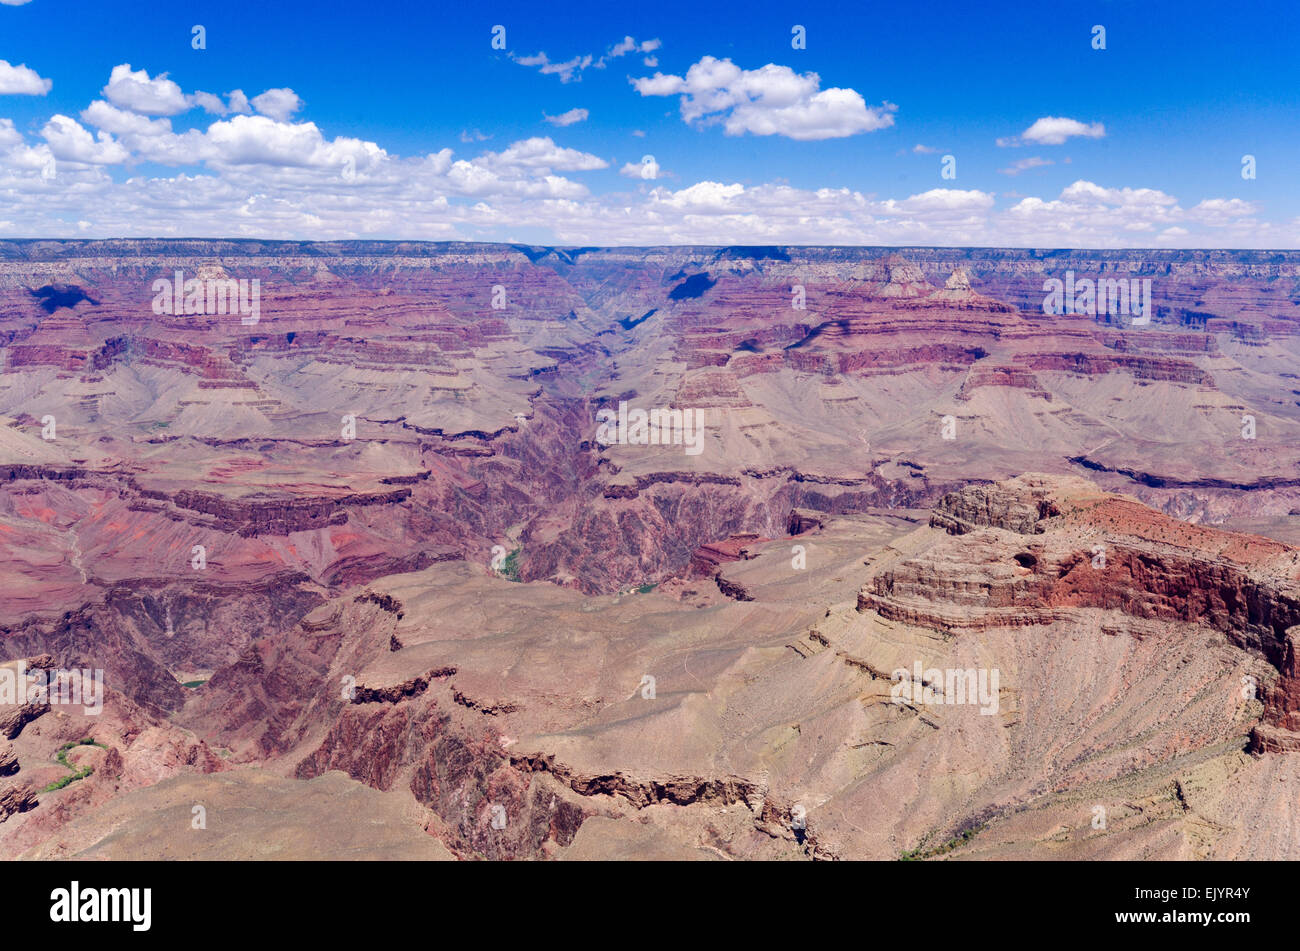 Looking towards the North Rim of the Grand Canyon on a bright day Stock Photo